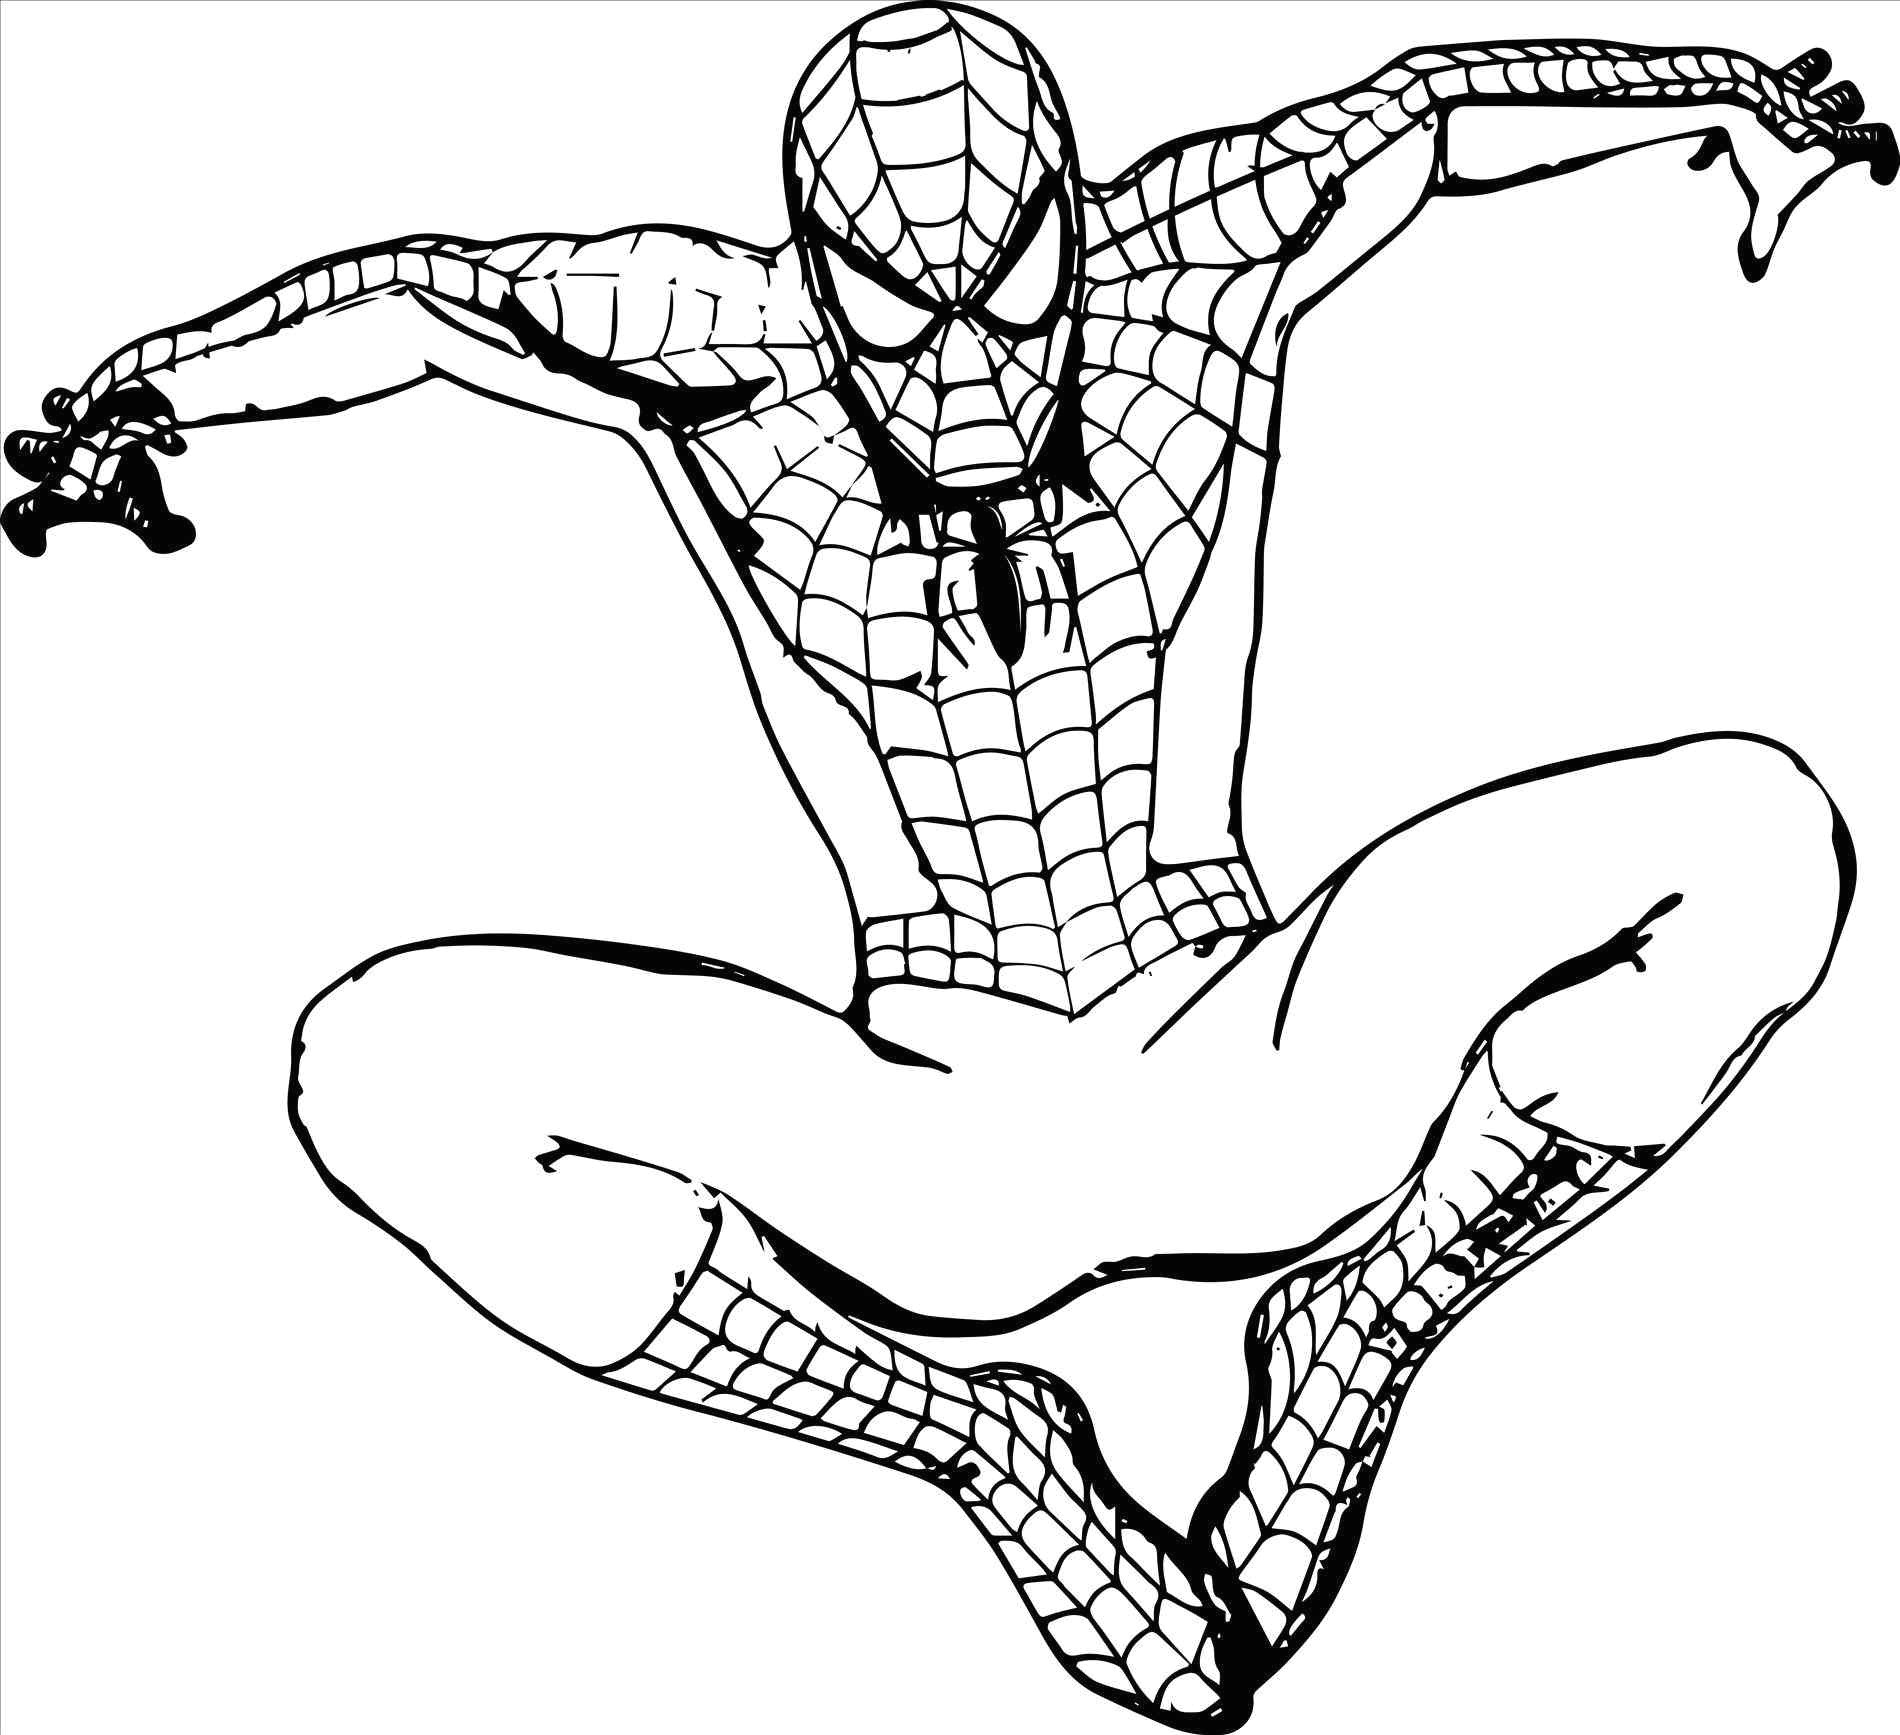 Easy L Drawing Spiderman Coloring Pages to Print Luxury Superheroes Easy to Draw